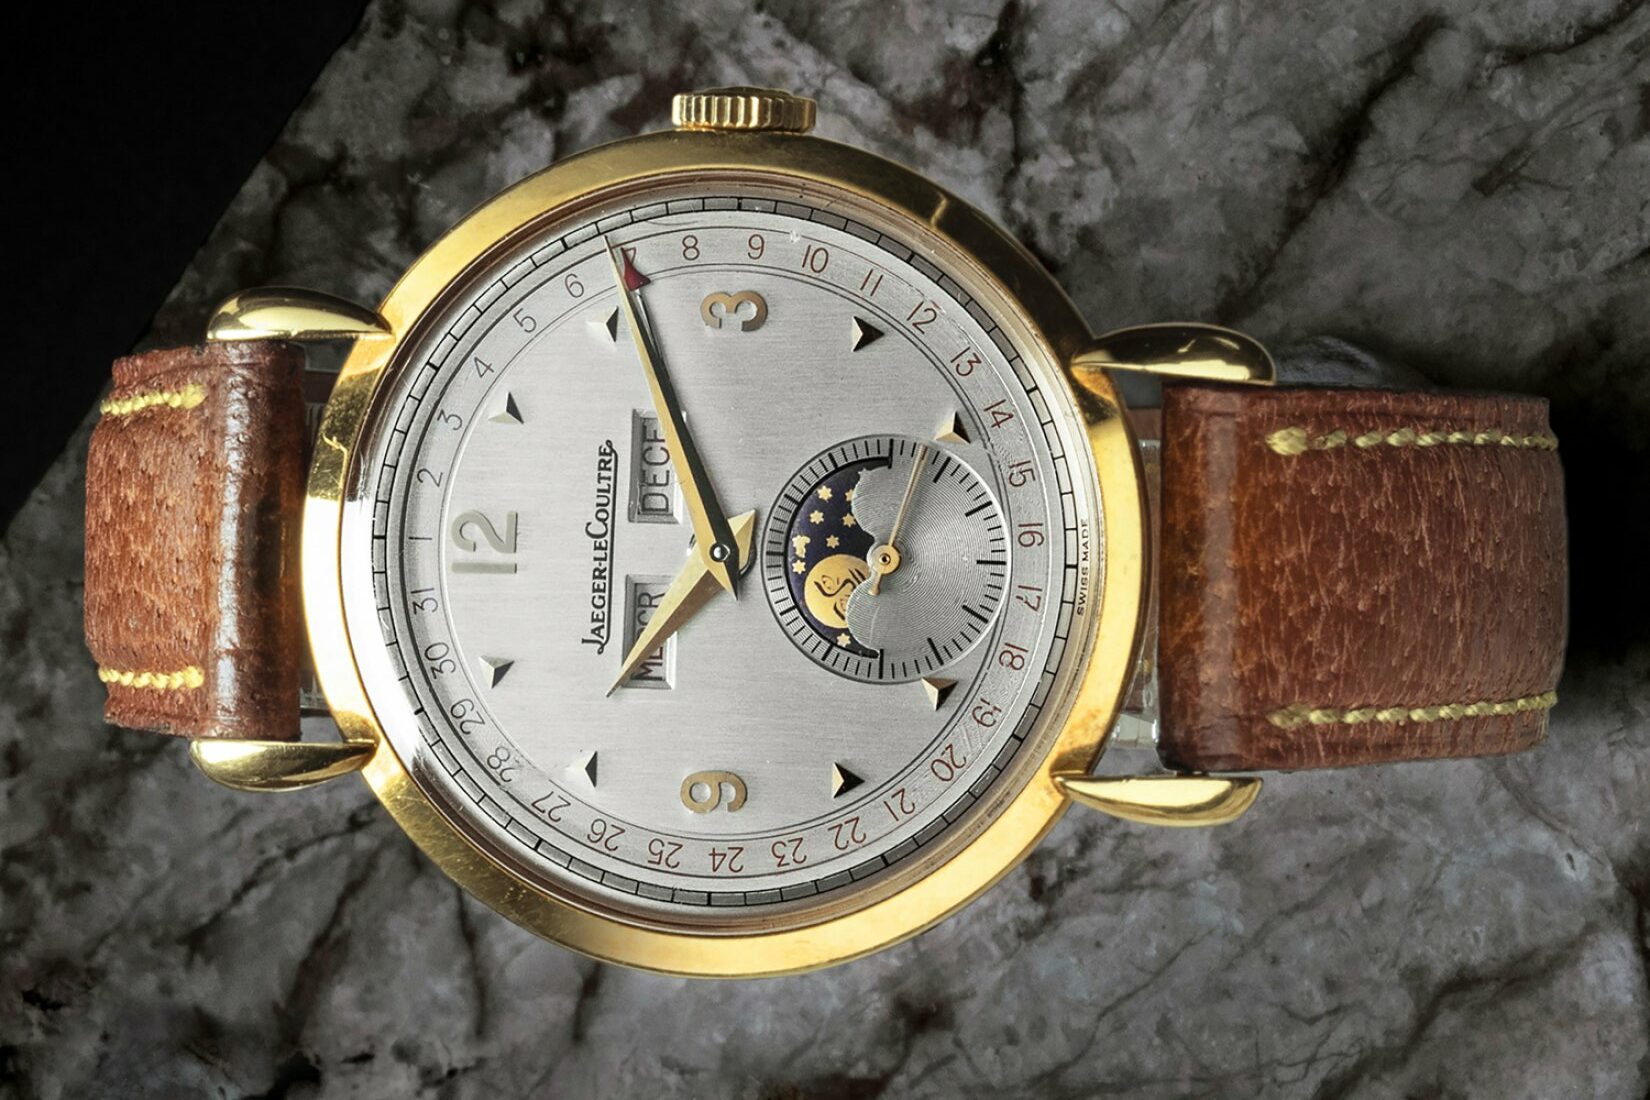 Ineichen Zurich’s May 22 Auction For High-Demand Watches With Practical Opening Prices